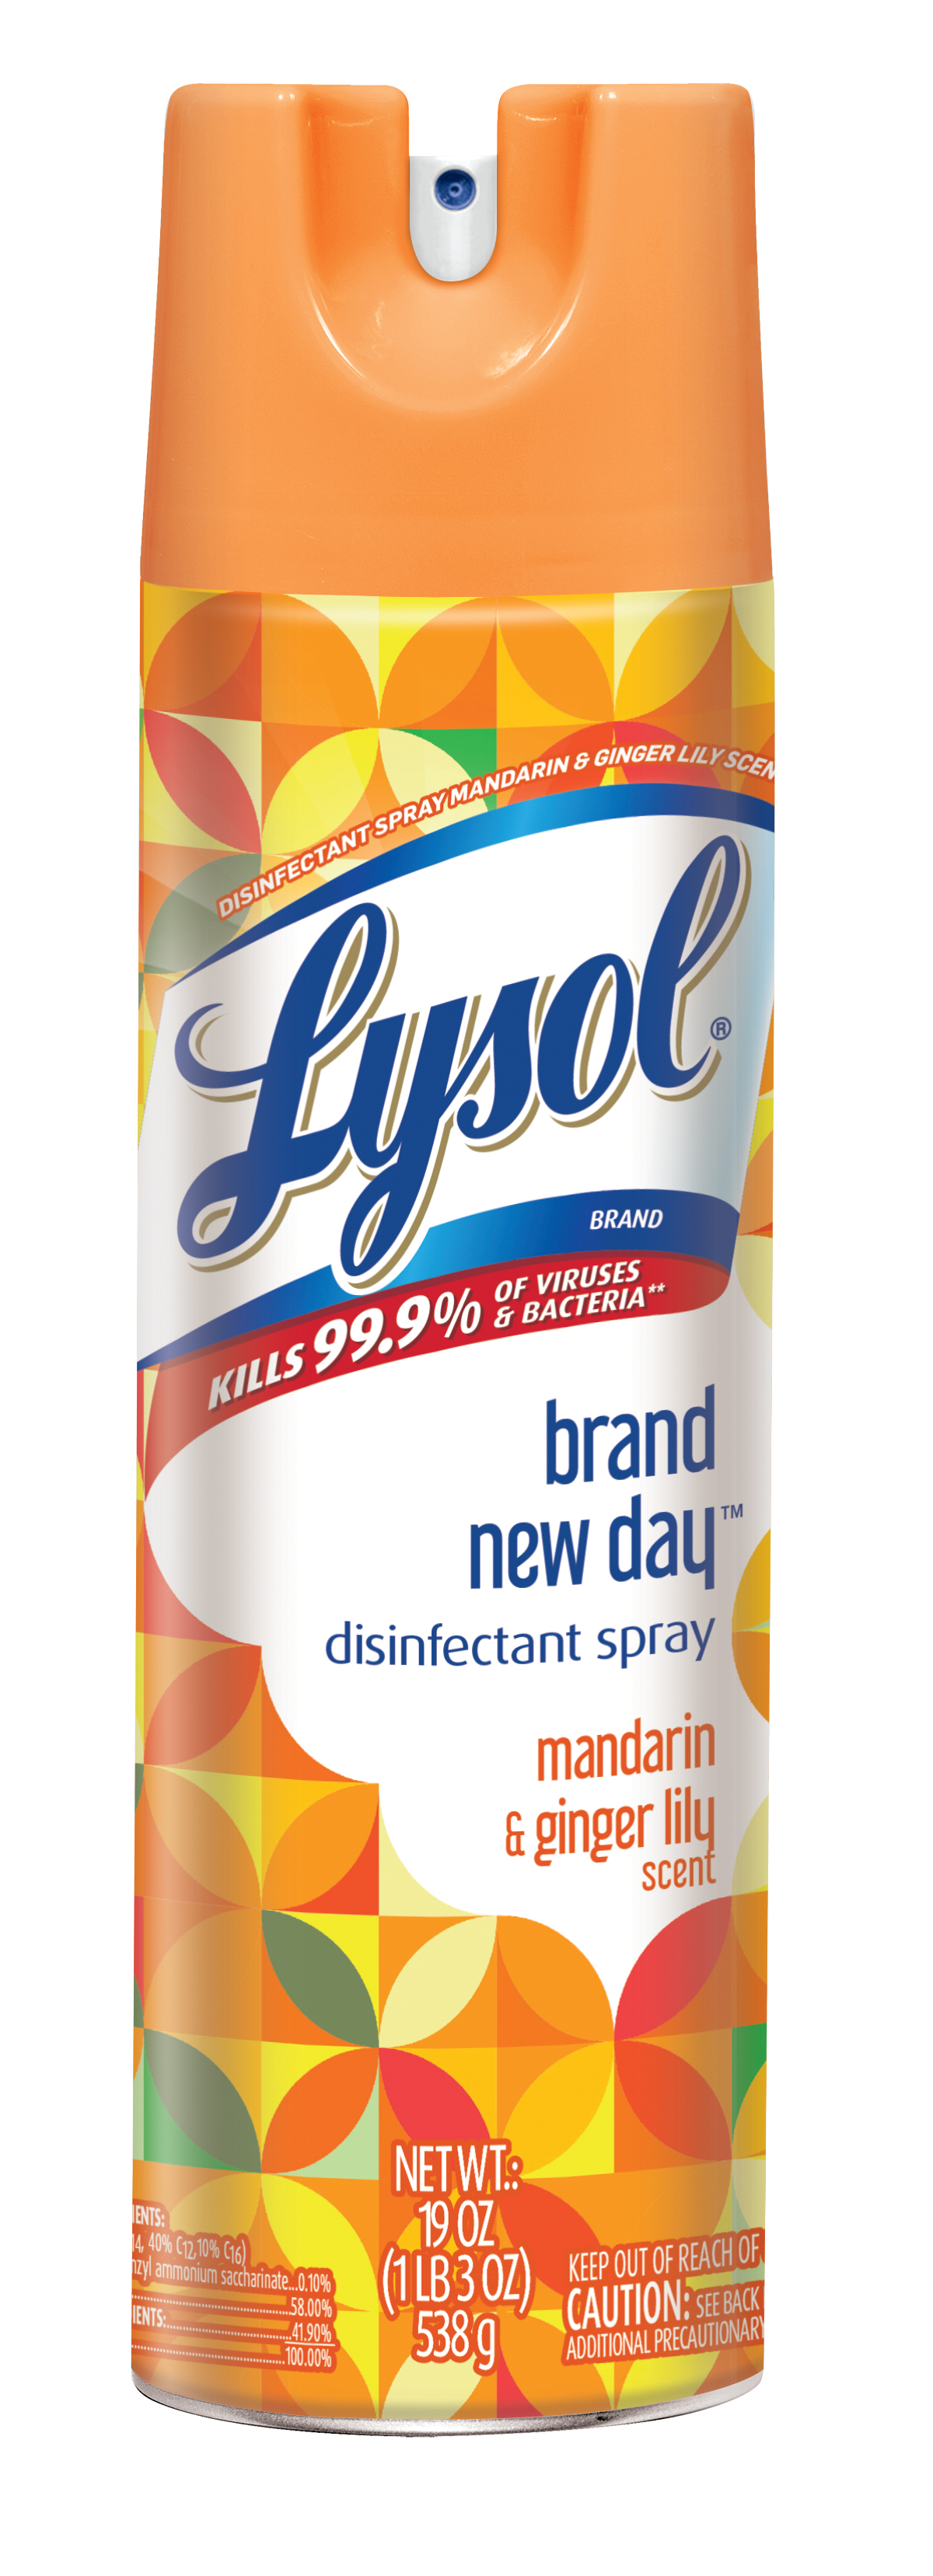 LYSOL Disinfectant Spray  Brand New Day Mandarin  Ginger Lily